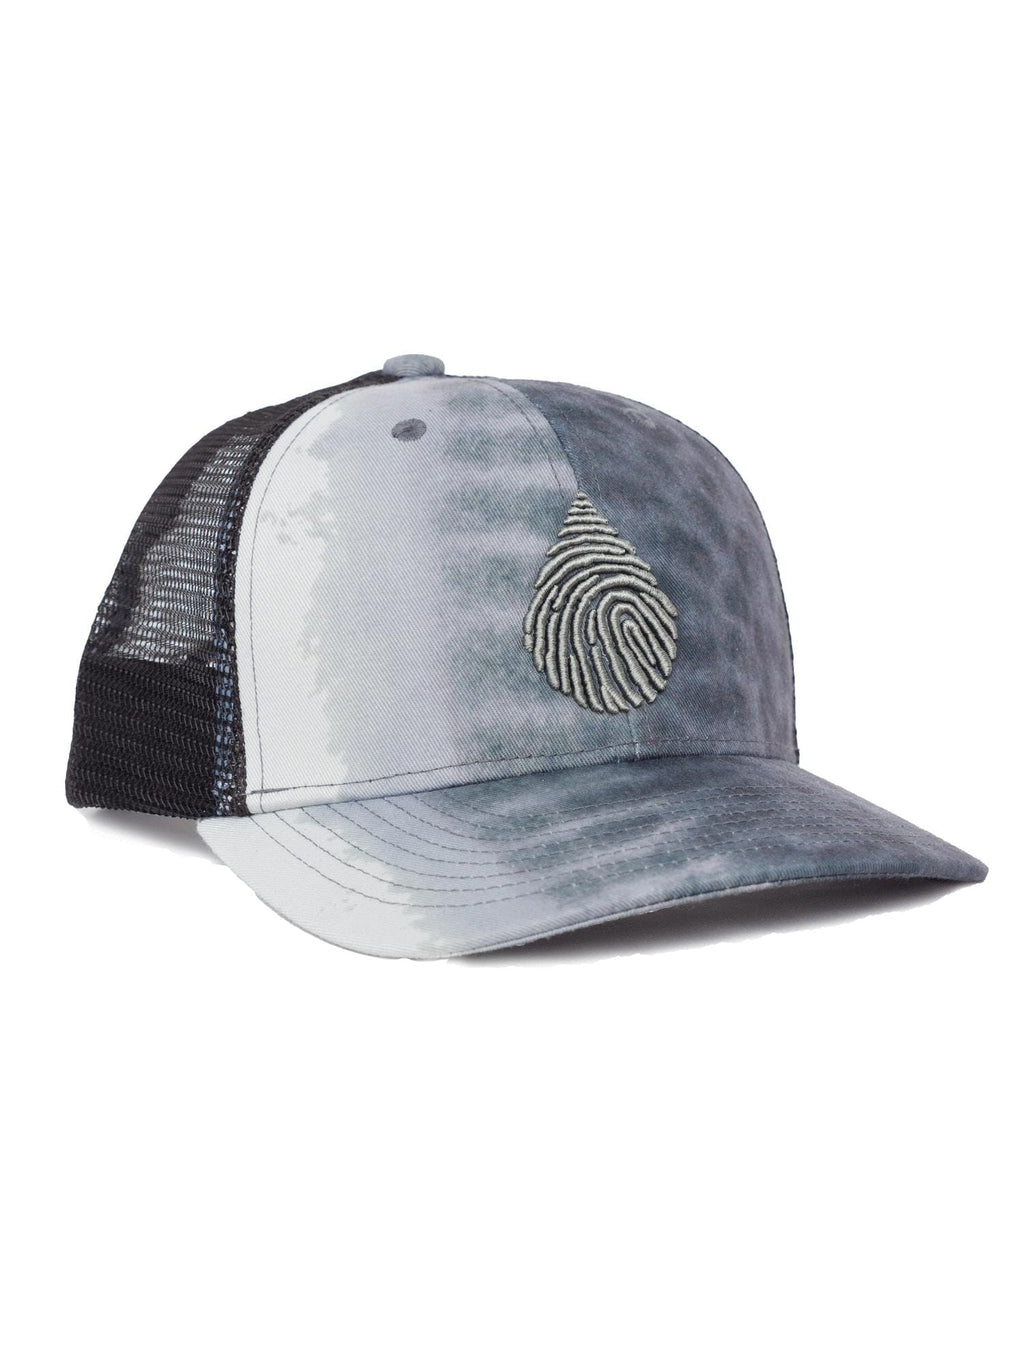 Picture of a tiger shark printed recycled trucker cap hat with gray waterlust 3d embroidered logo